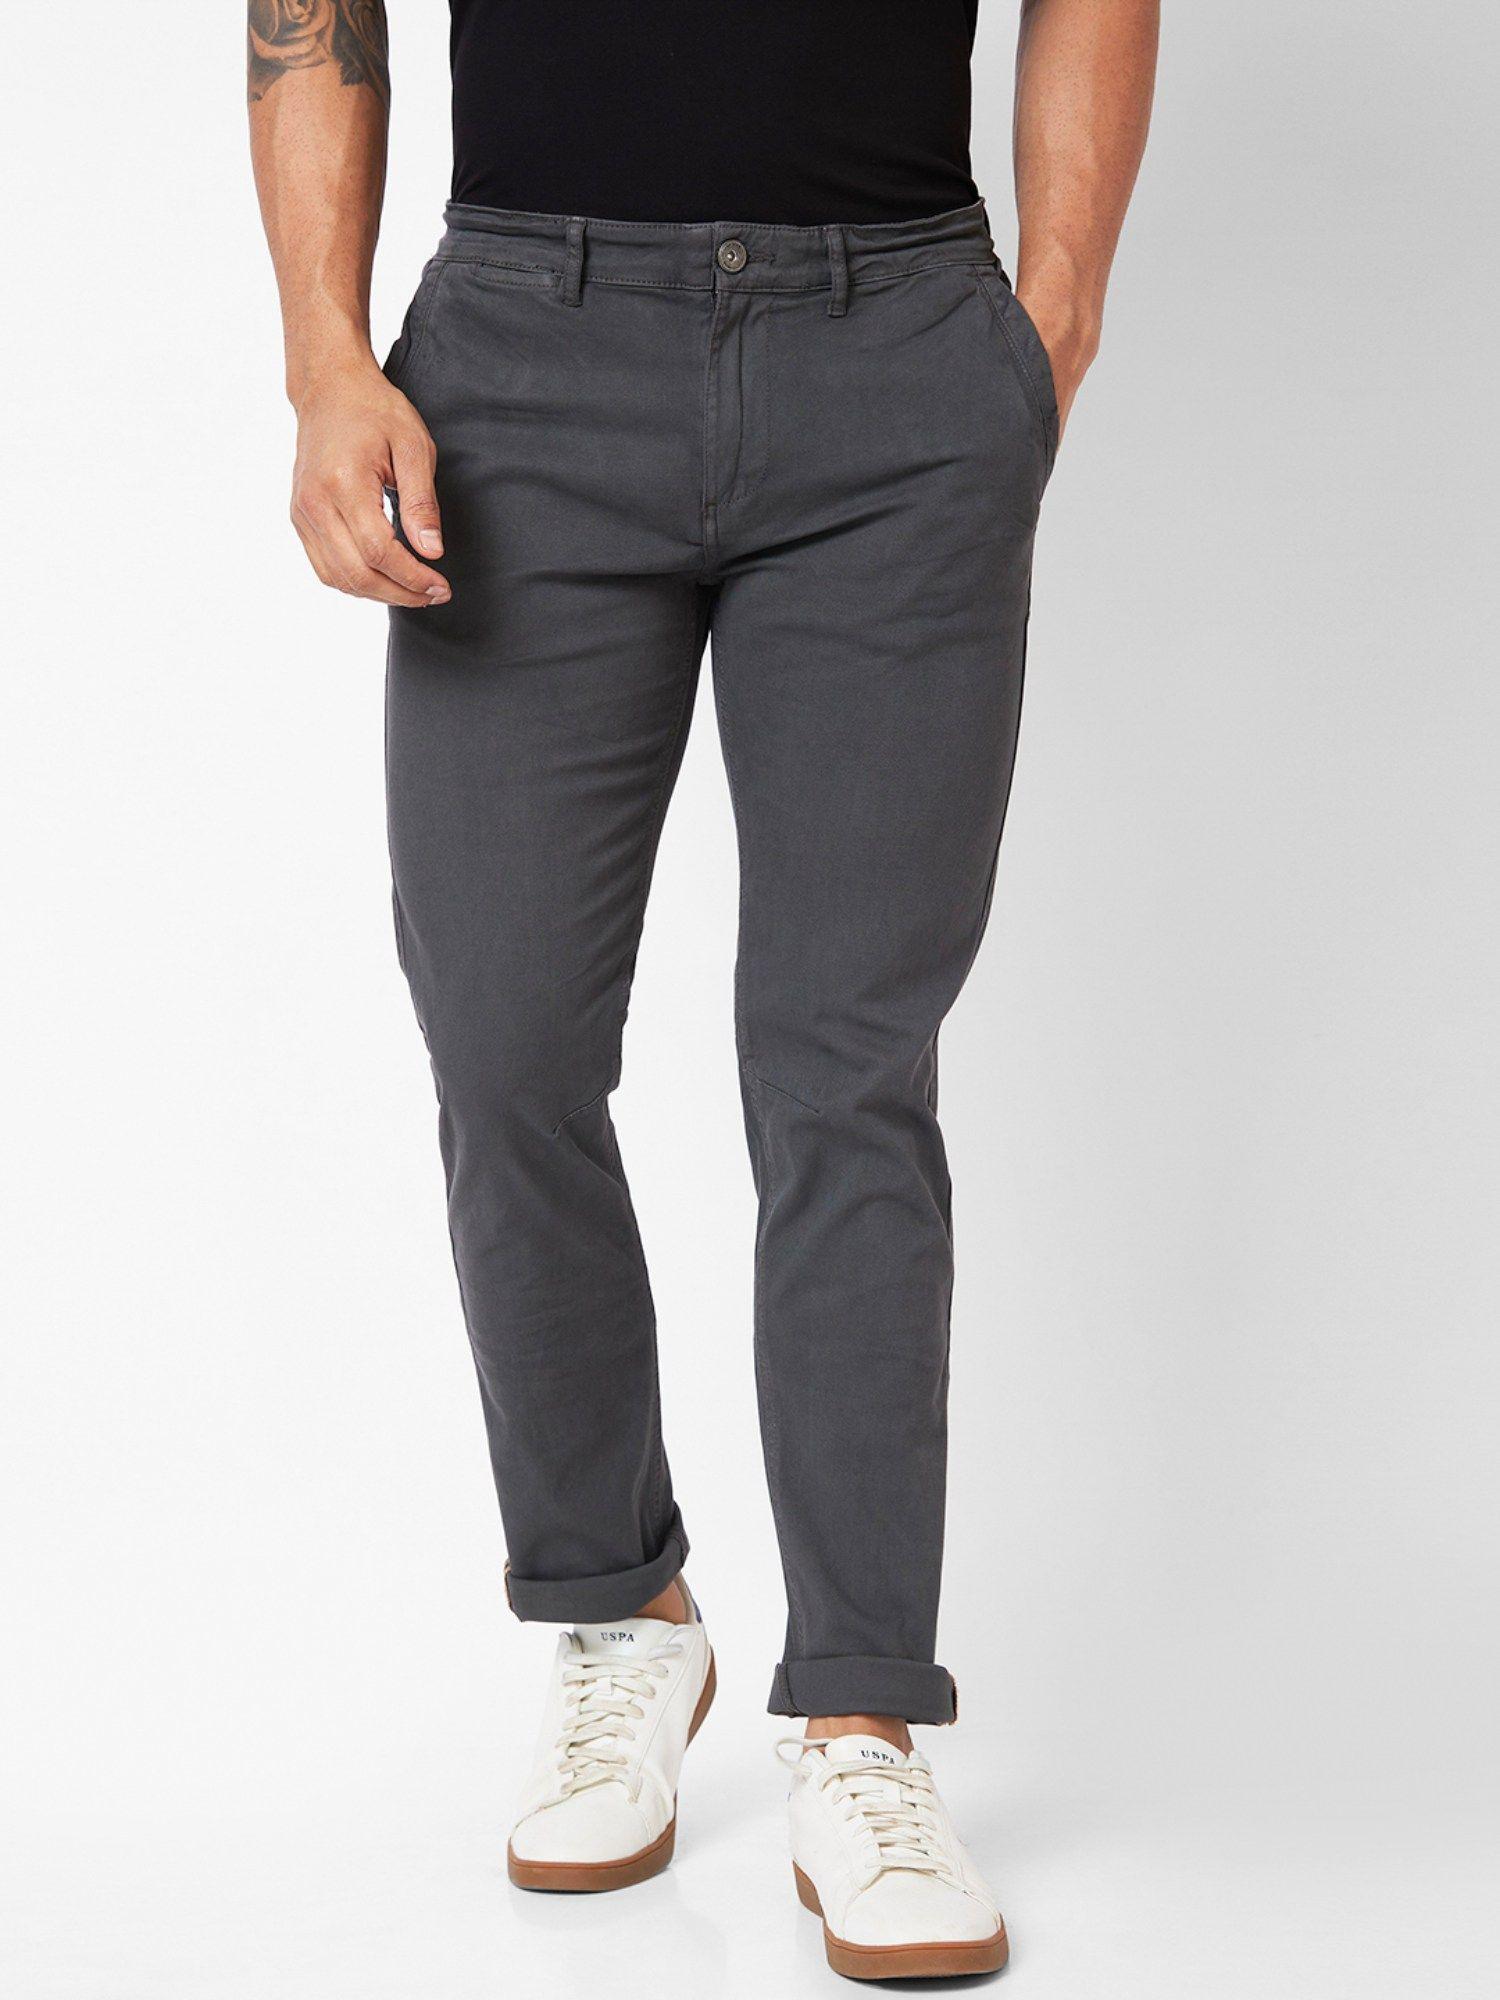 mid-rise regular fit grey trousers for men